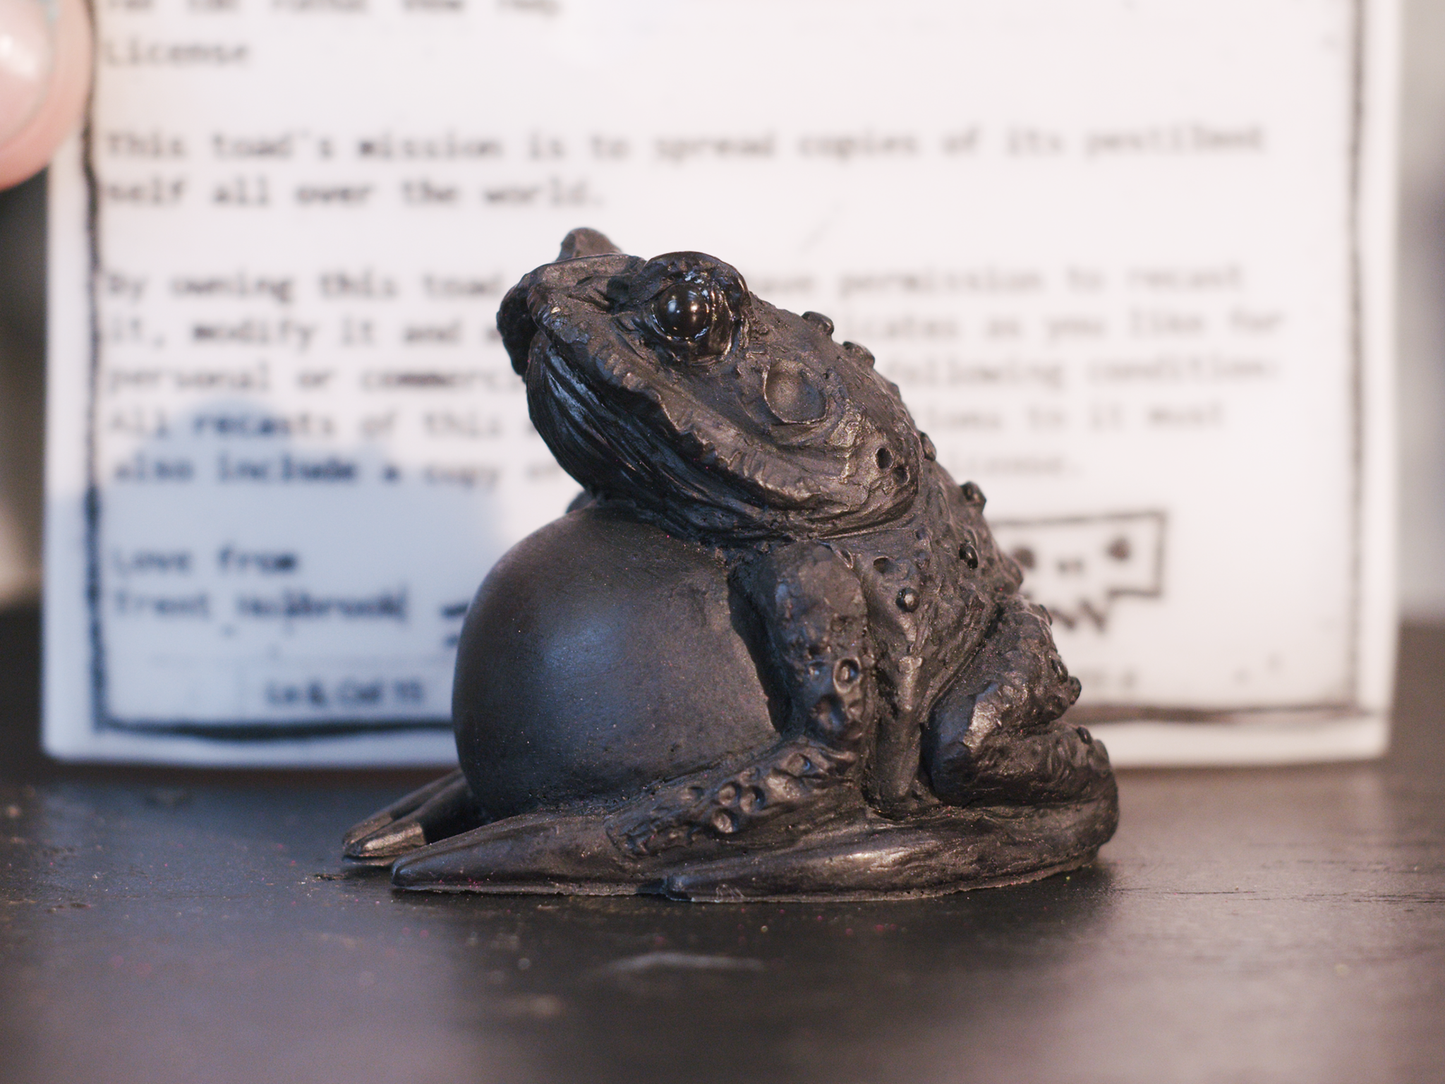 Miscast's Toads -Toad V2 Generation 1 + Recasting License - 1 of 36